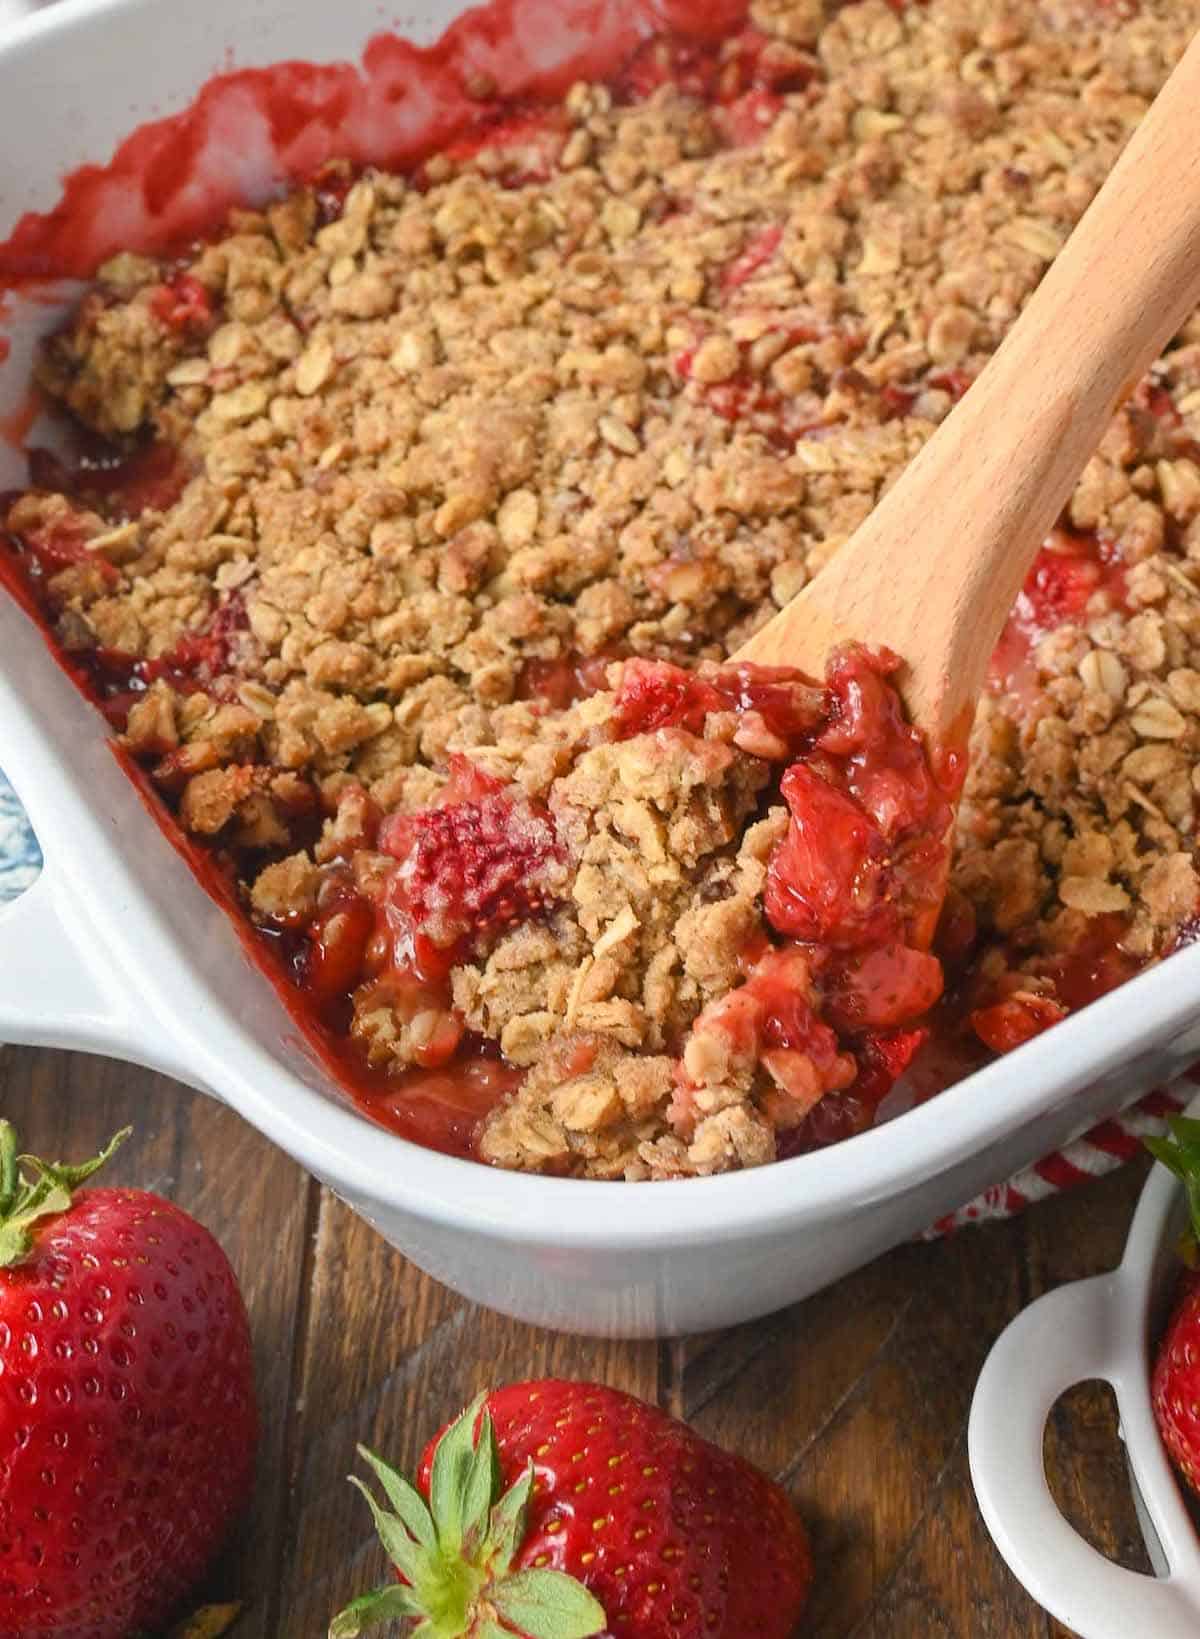 A wooden spoon scooping out a serving of strawberry crisp.